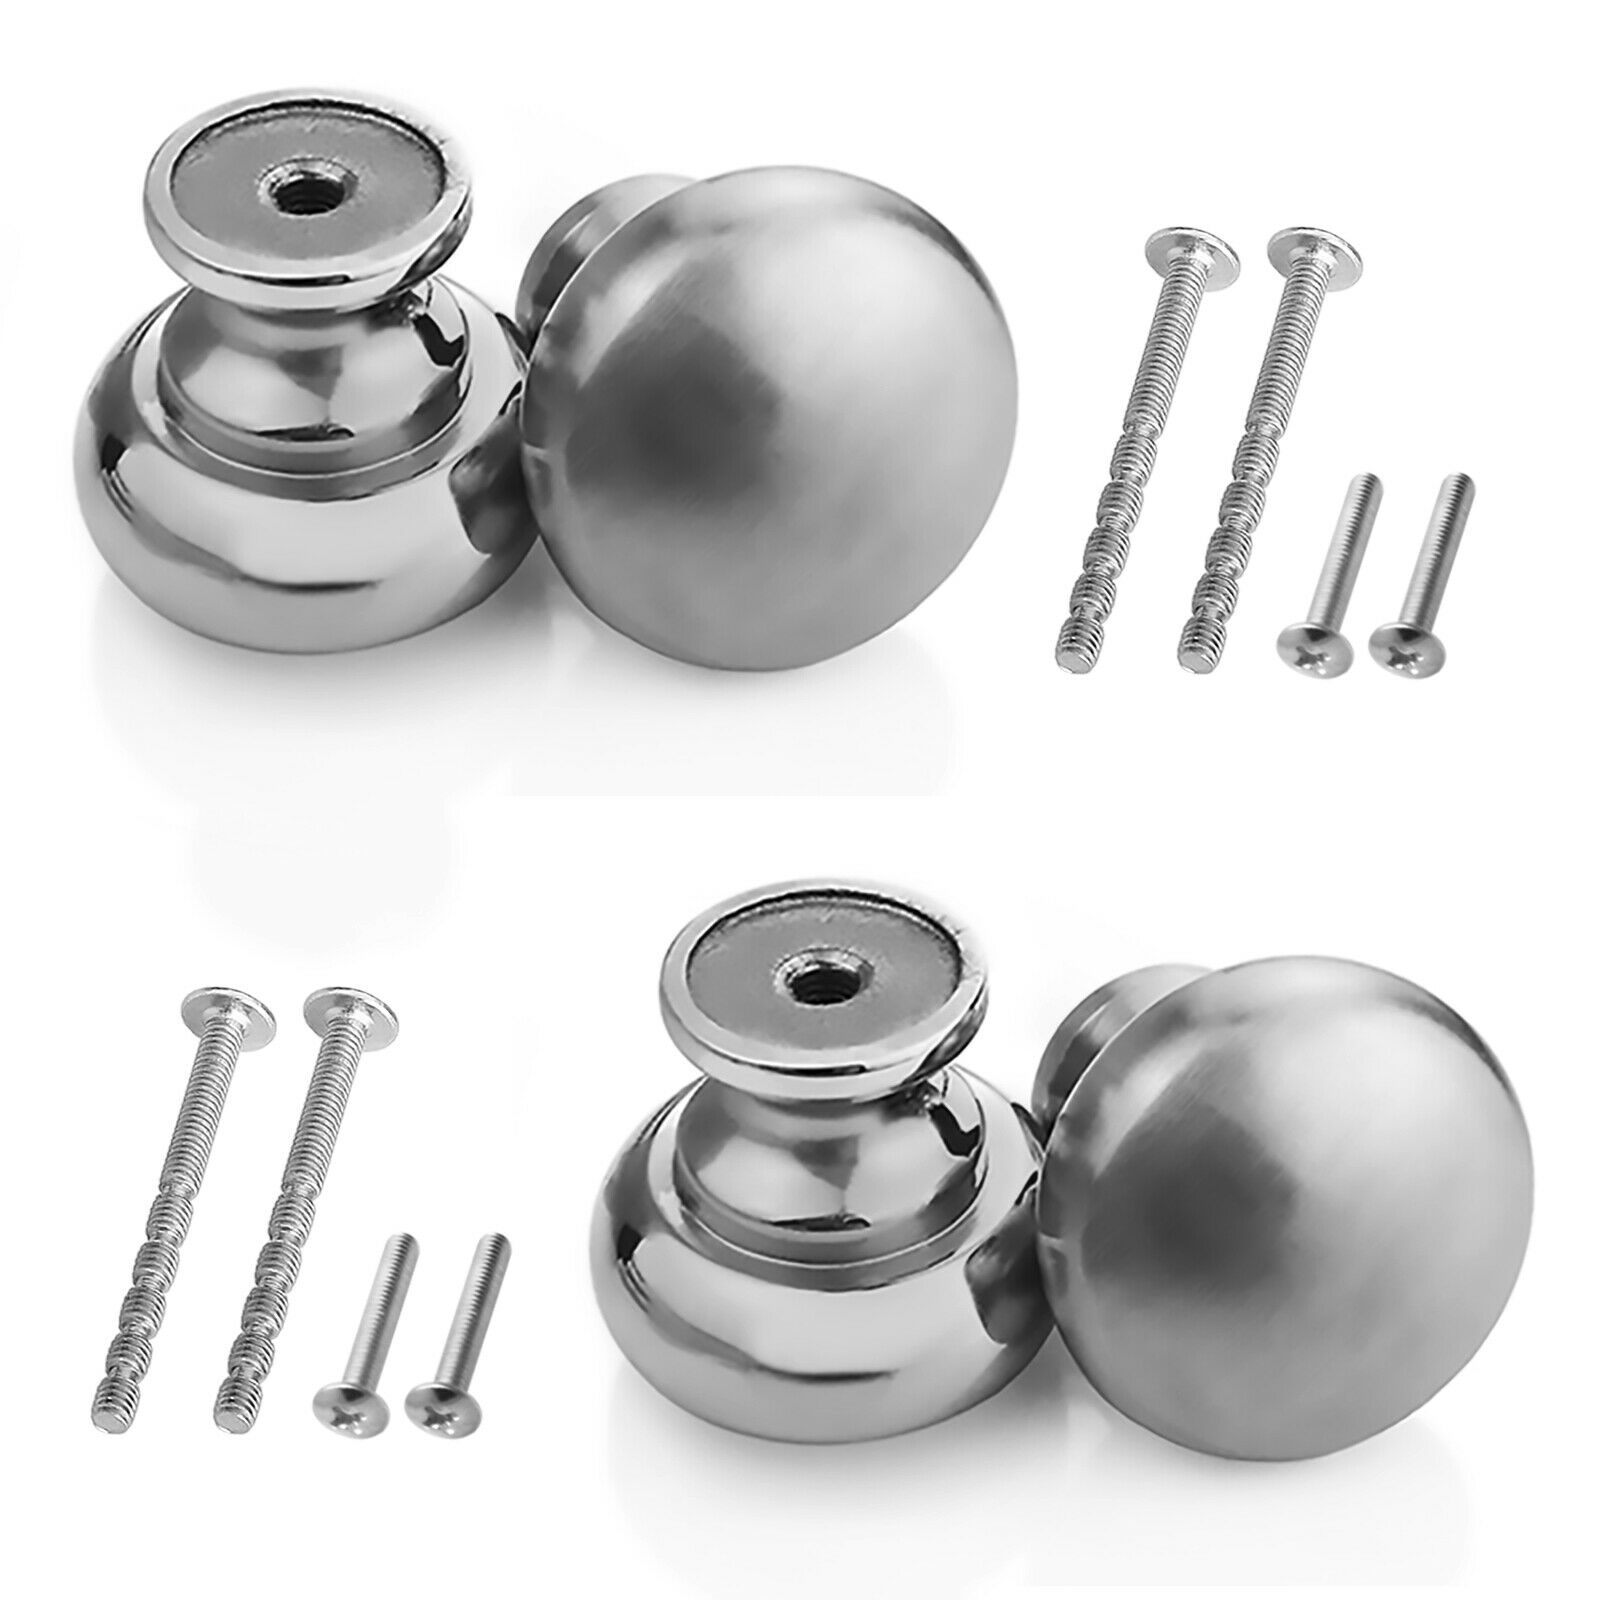 4 Packs 1-1/4 inch Diameter Cabinet Round Knobs Solid Stainless Steel Brushed